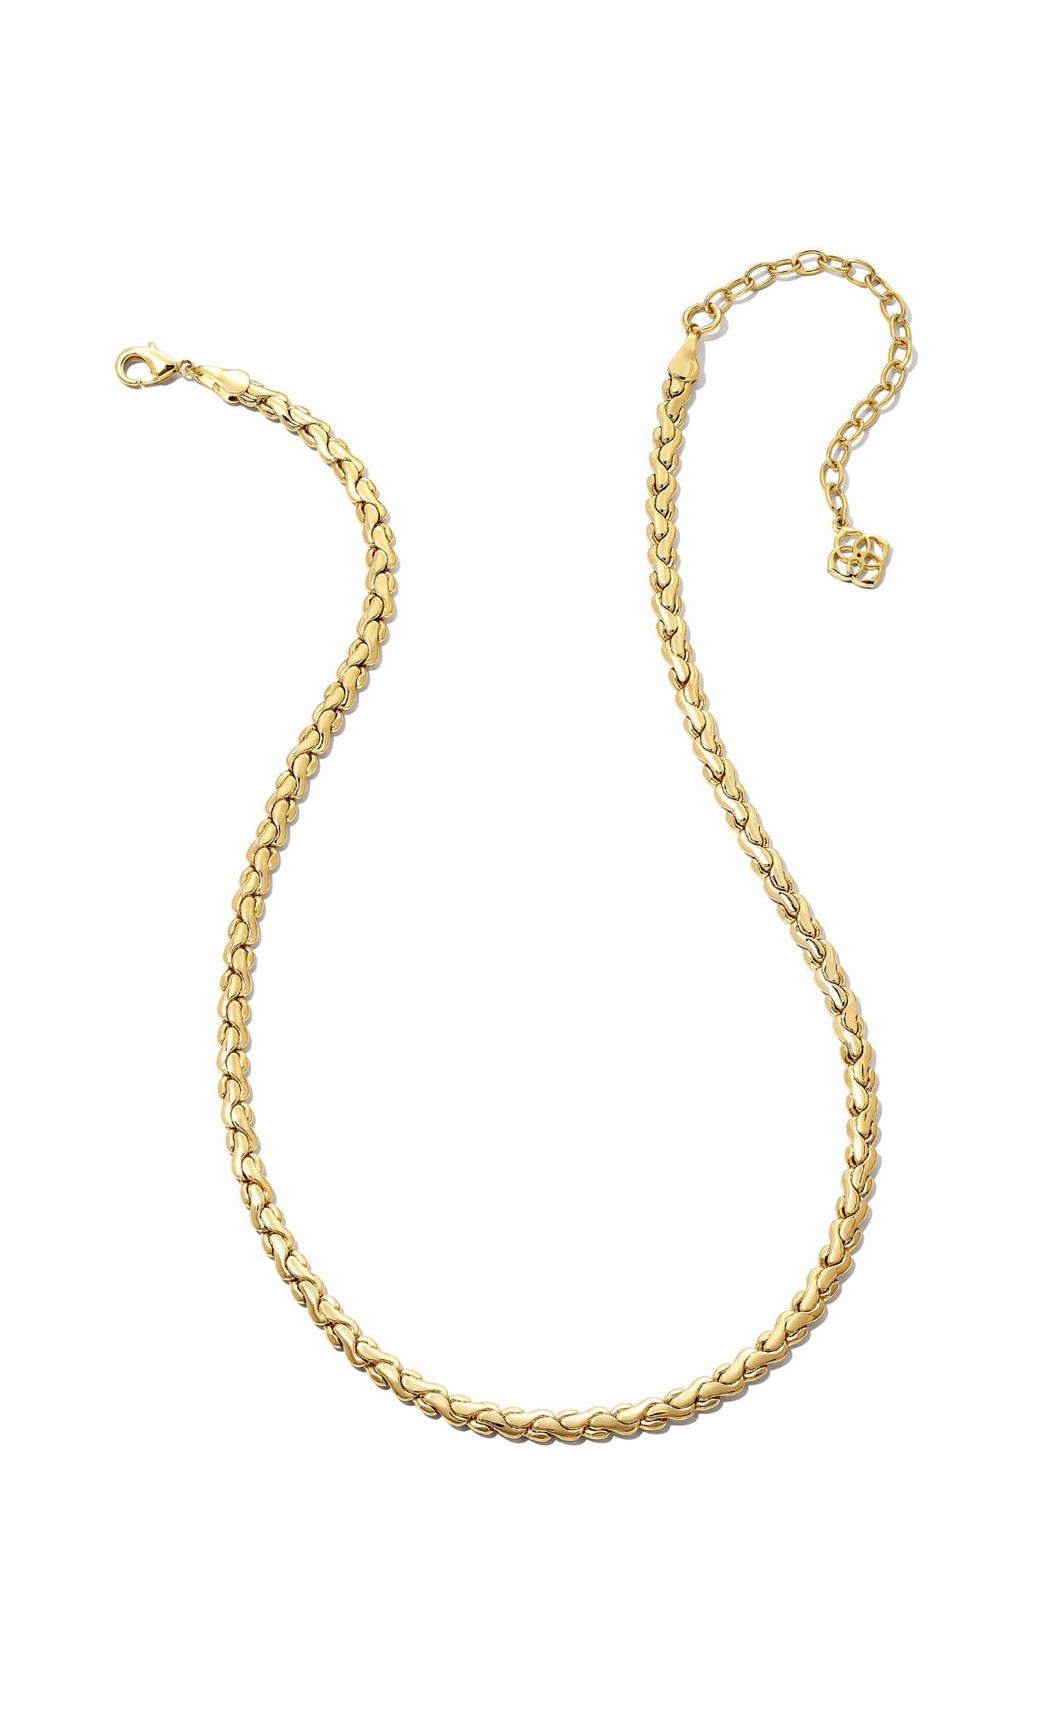 Kendra Scott:Brielle Chain Necklace in Gold